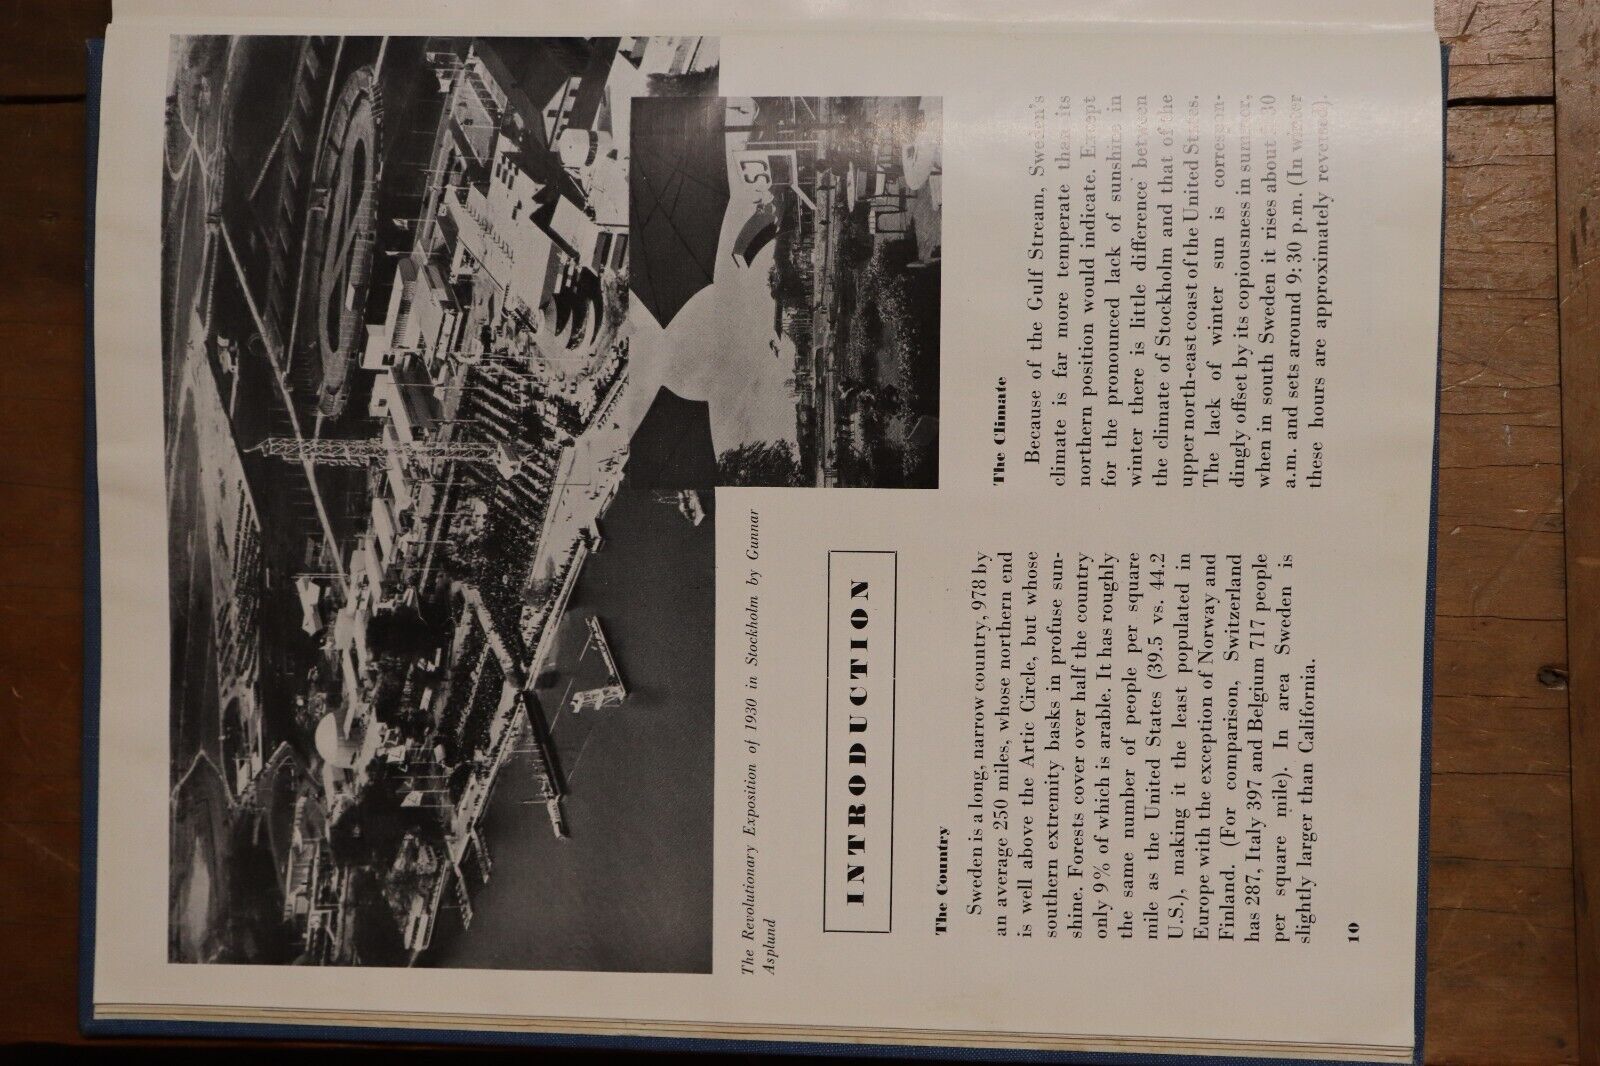 Sweden Builds: Modern Architecture & Land Policy - 1950 - Architecture Book